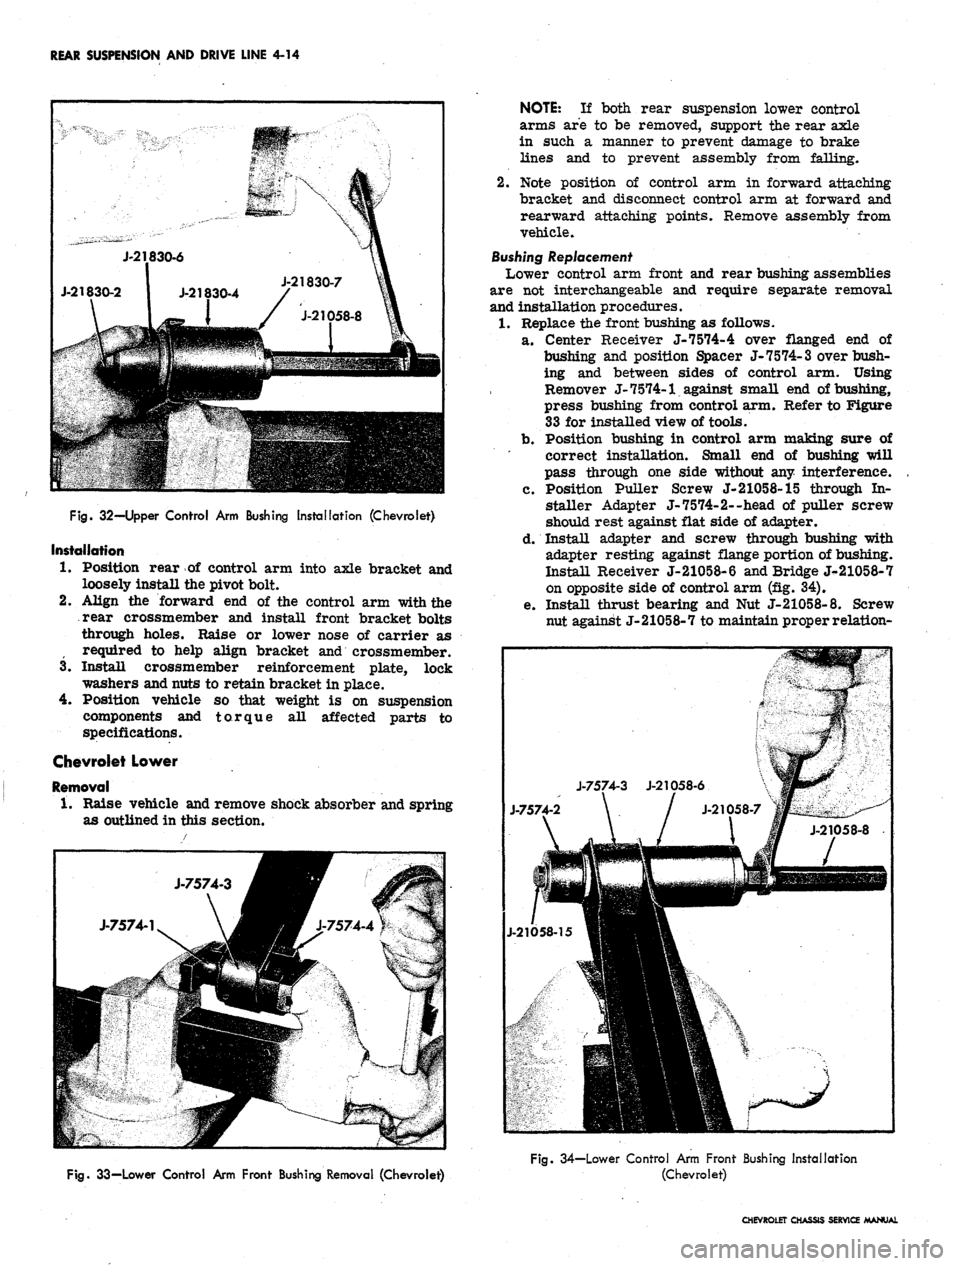 CHEVROLET CAMARO 1967 1.G Chassis Service Manual 
REAR SUSPENSION AND DRIVE LINE 4-14

Fig.
 32—Upper Control Arm Bushing Installation (Chevrolet)

Installation

1.
 Position rear of control arm into axle bracket and

loosely install the pivot bol